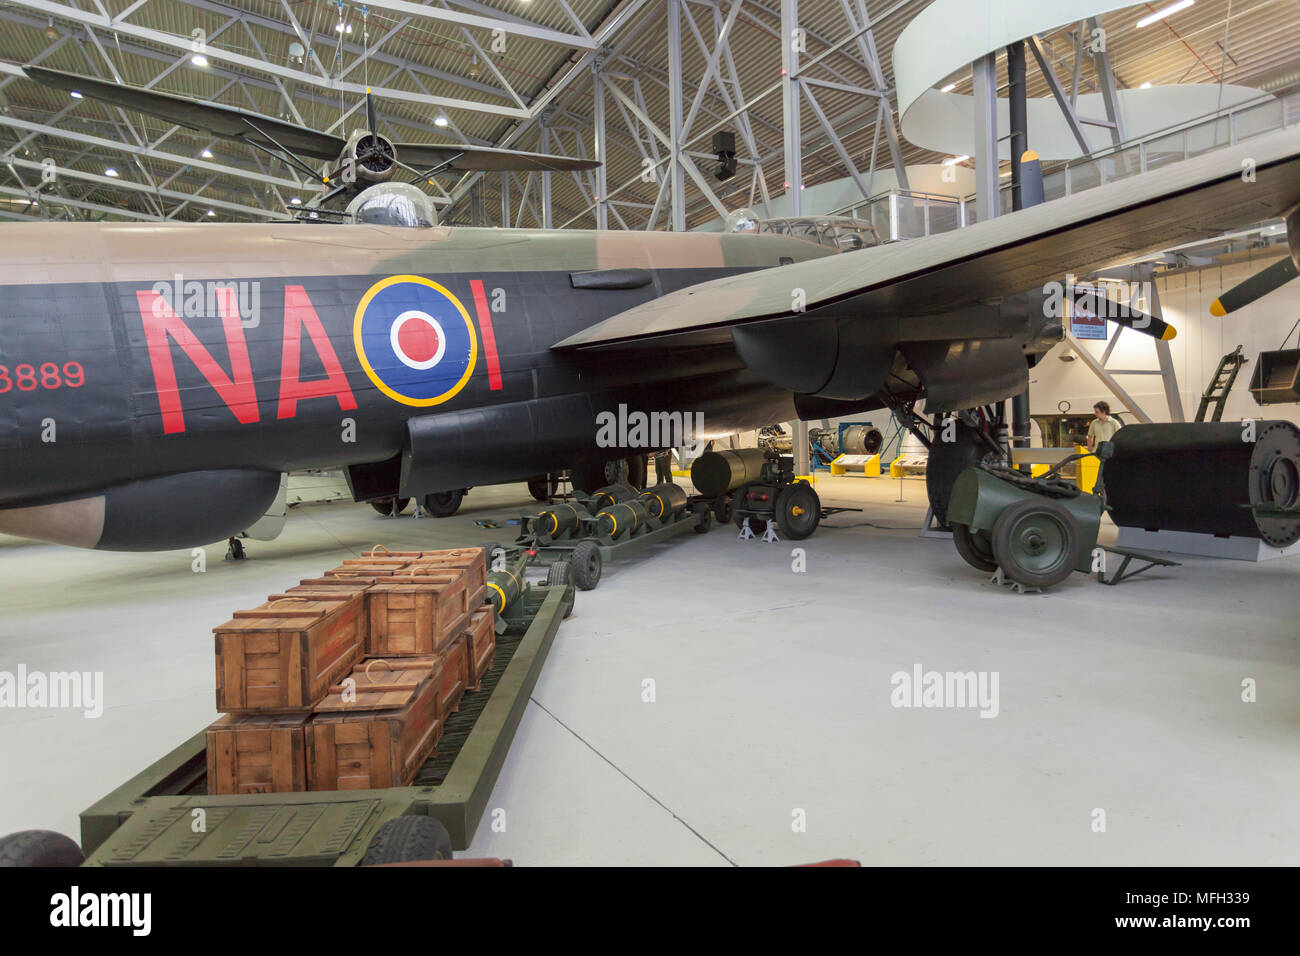 Duxford Imperial War Museum. England, UK.  A Lancaster bomber in an aircraft hanger is ready to be loaded from a train filled with bombs and cases of ammunition. Stock Photo